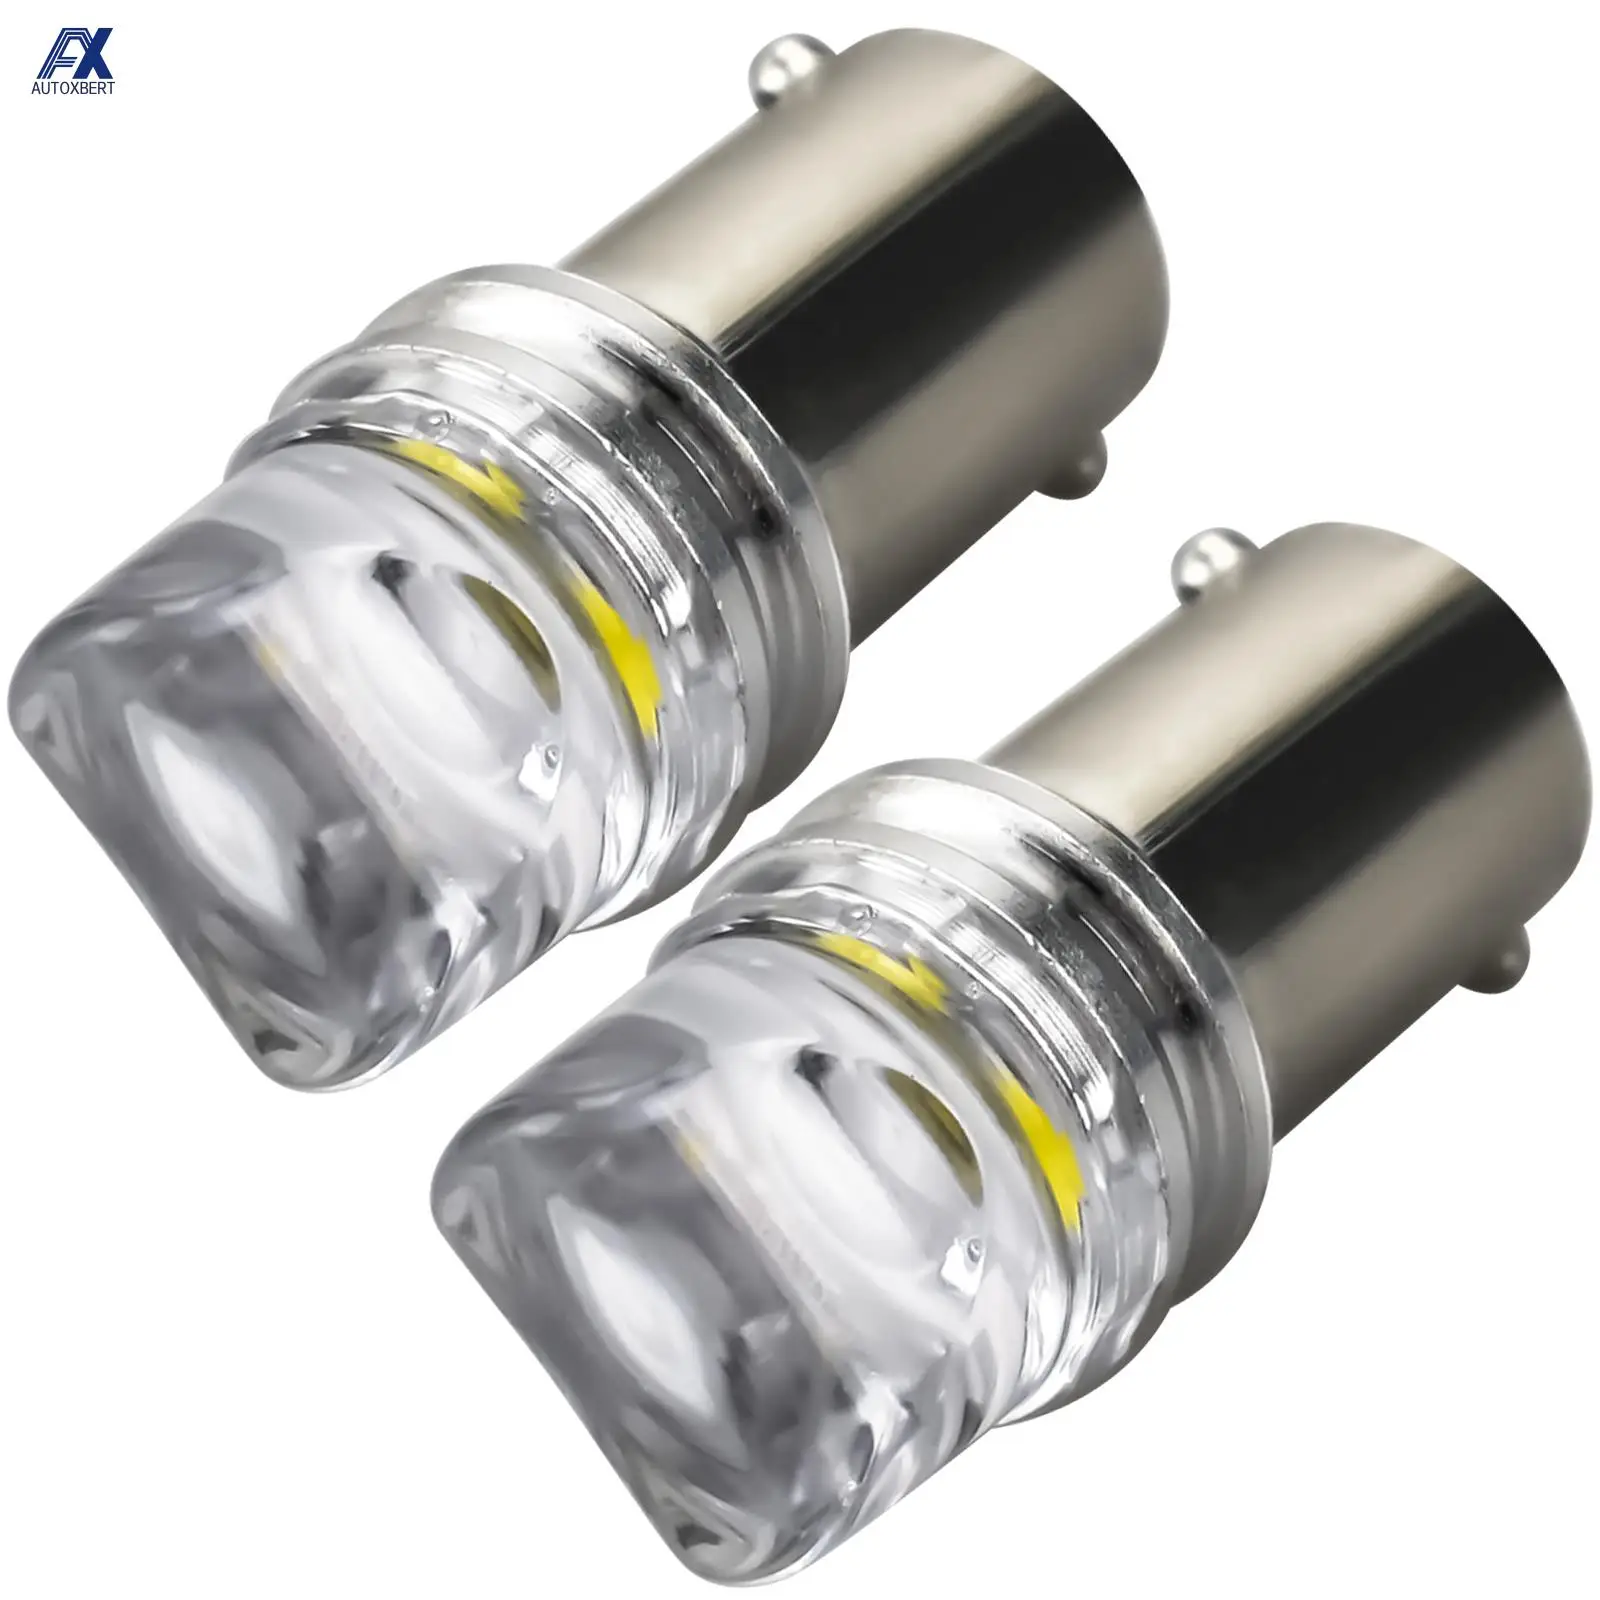 

T4w Ba9s 233 Sidelight Led White Bayonet T11 Car Interior Xenon Sidelight Bulb Footwell Door light License Number Plate Bulbs 2x